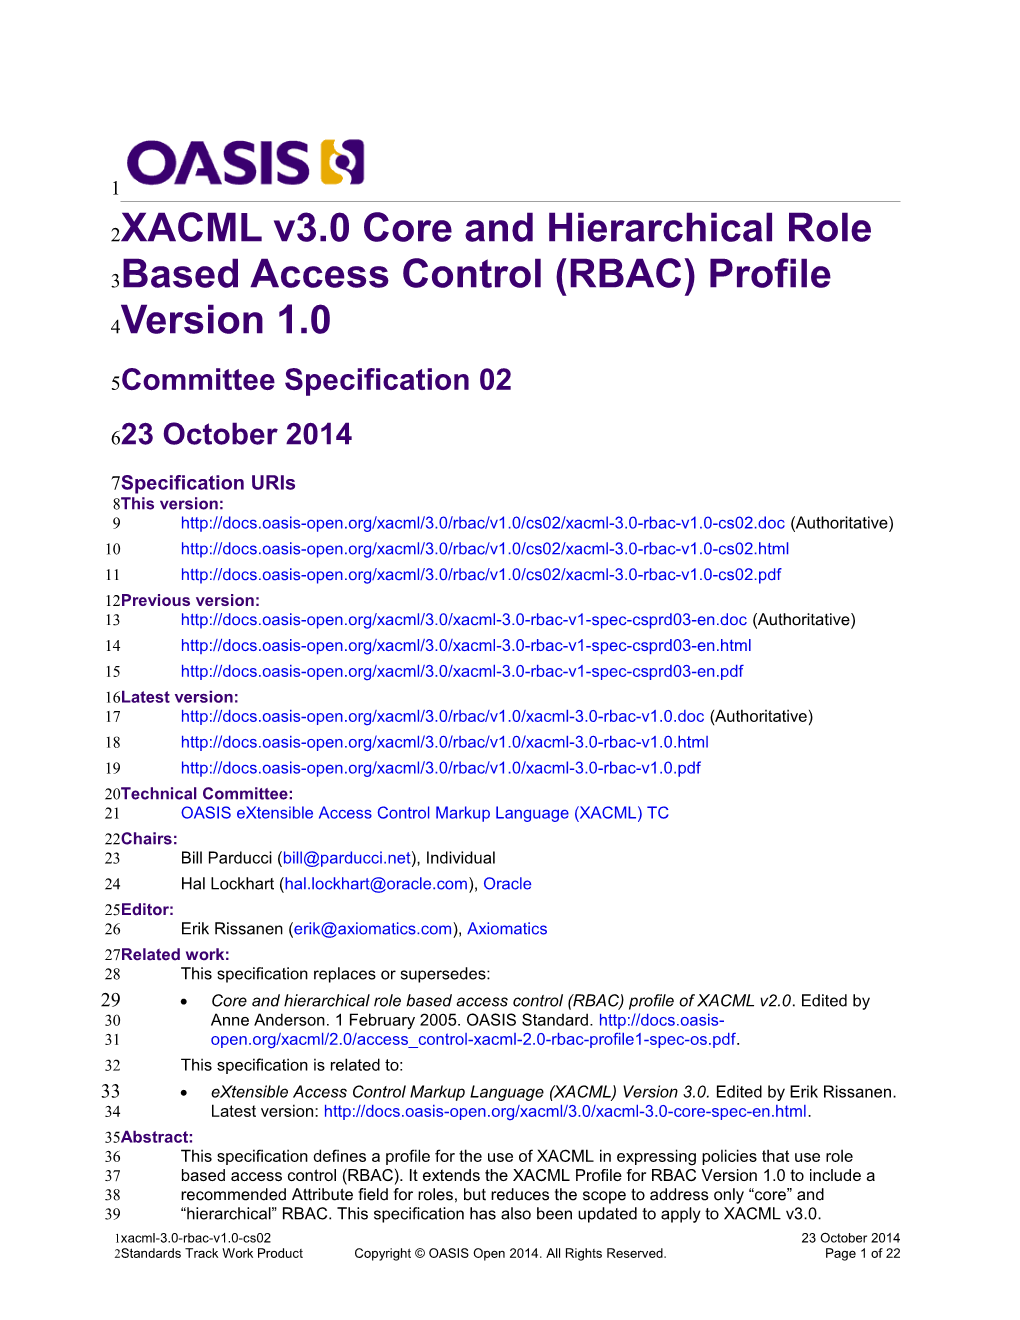 XACML V3.0 Core and Hierarchical Role Based Access Control (RBAC) Profile Version 1.0